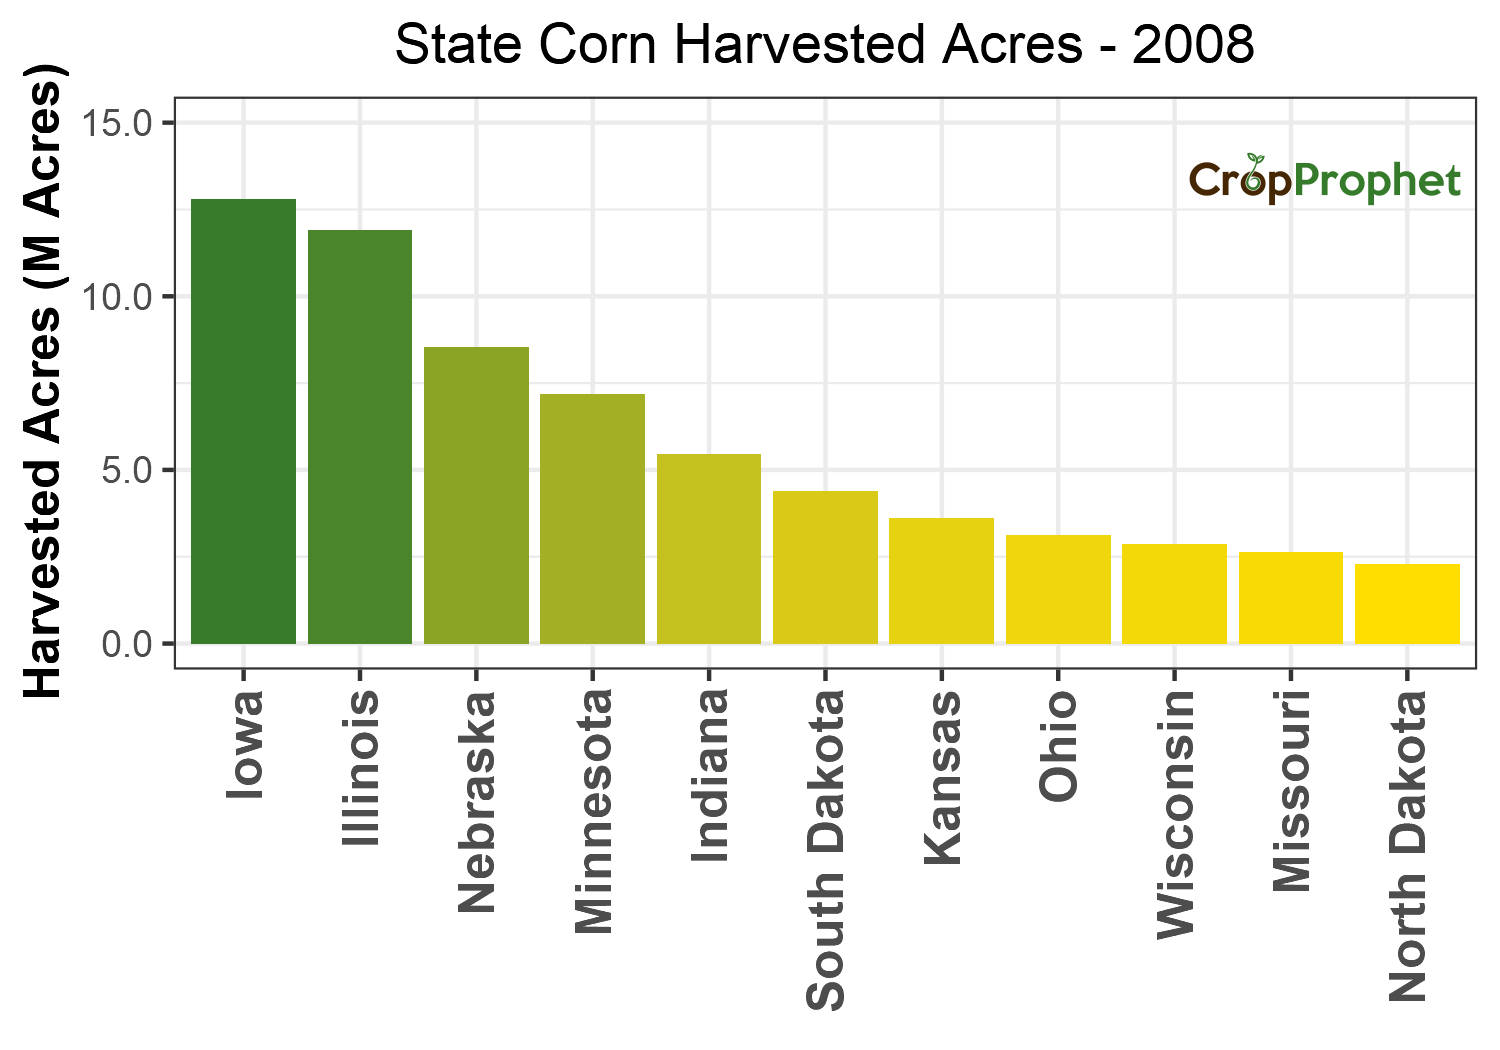 Corn Harvested Acres by State - 2008 Rankings